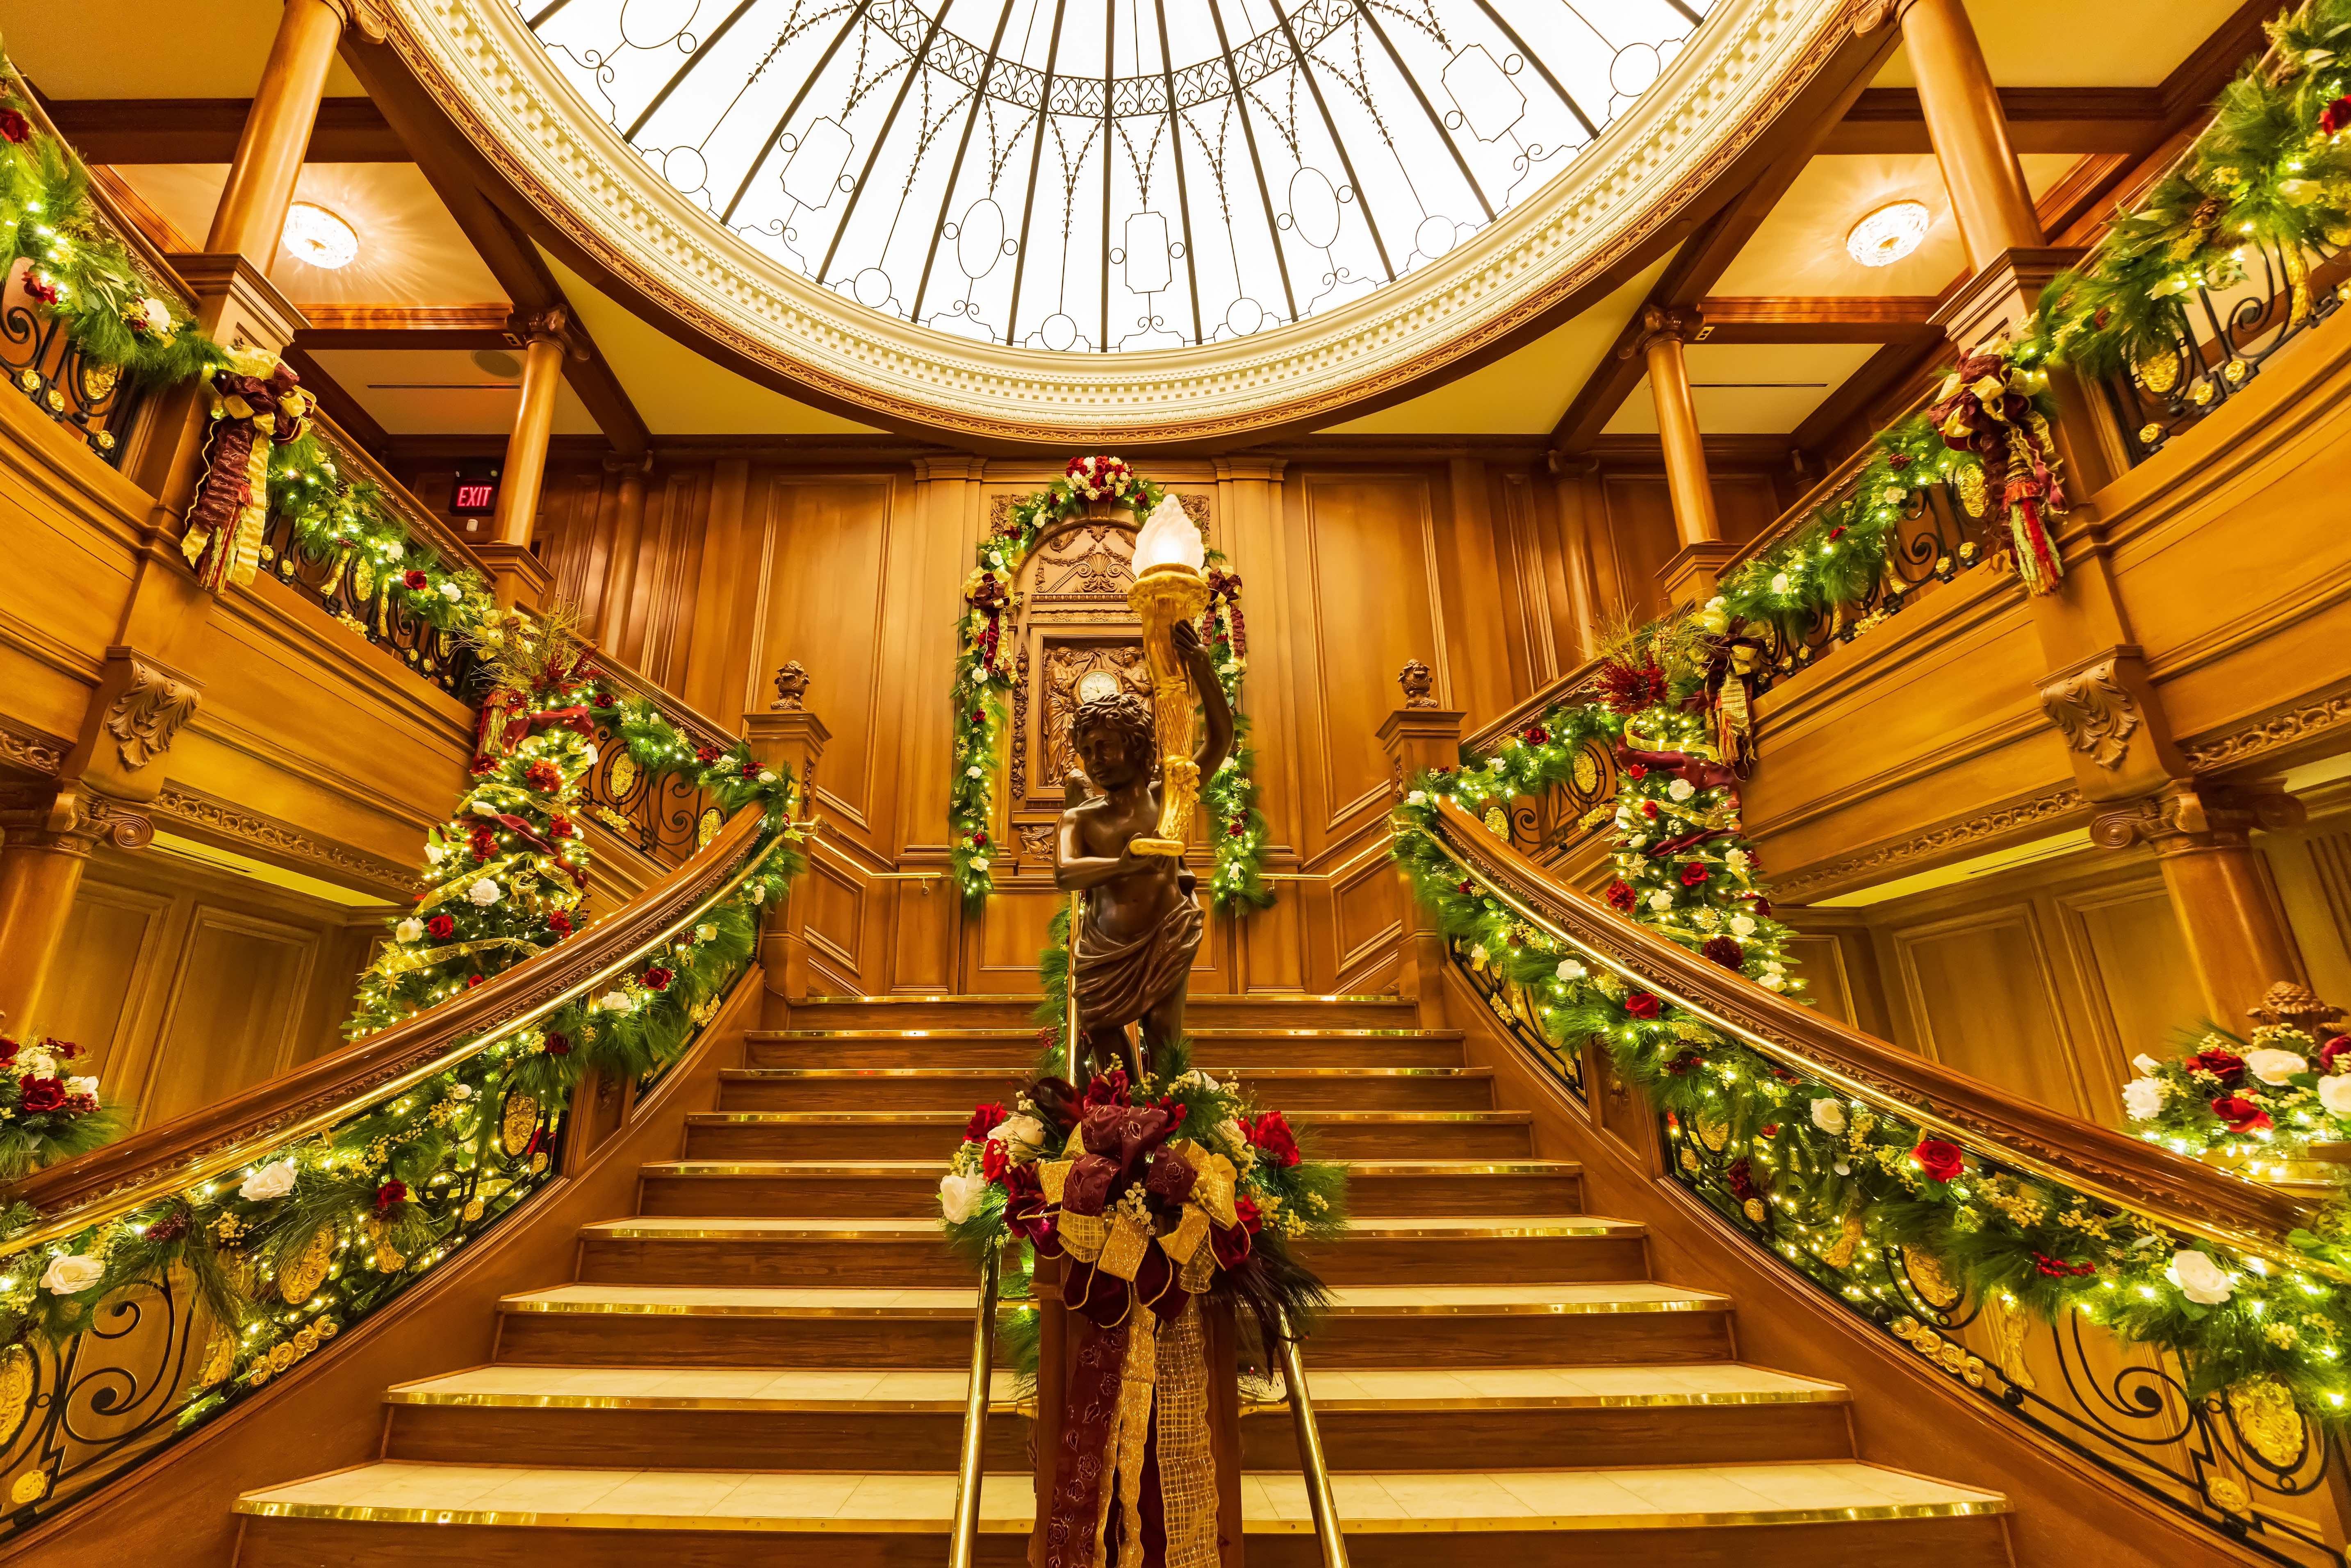 Grand golden staircase decorated with Christmas garlands int the Titanic Museum in Branson, Missouri